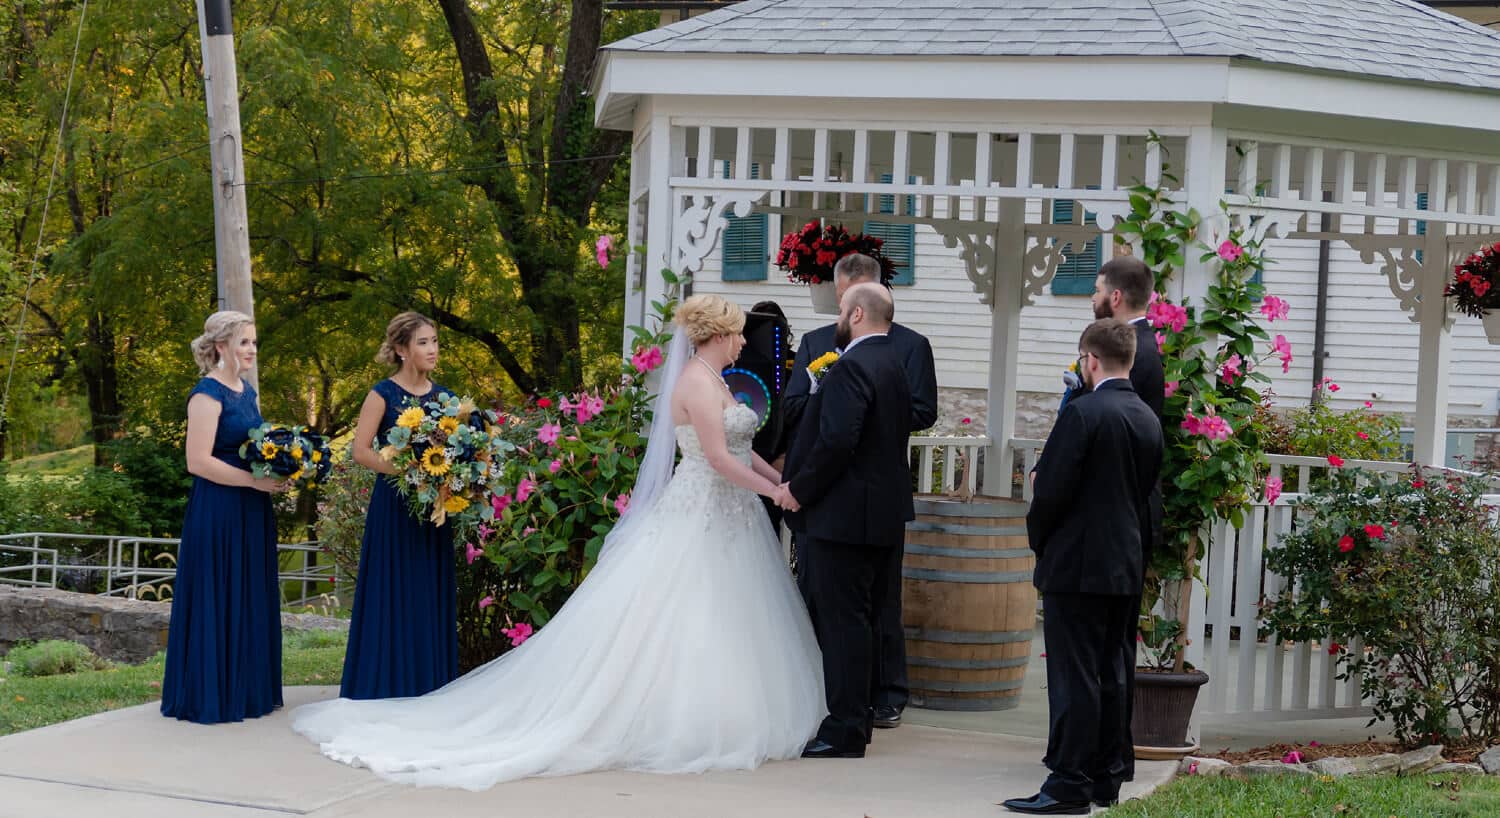 Close-up view of bride and grooms holding hands by gazebo with hanging potted pink flowers during exchanging of vows with wedding party observing.